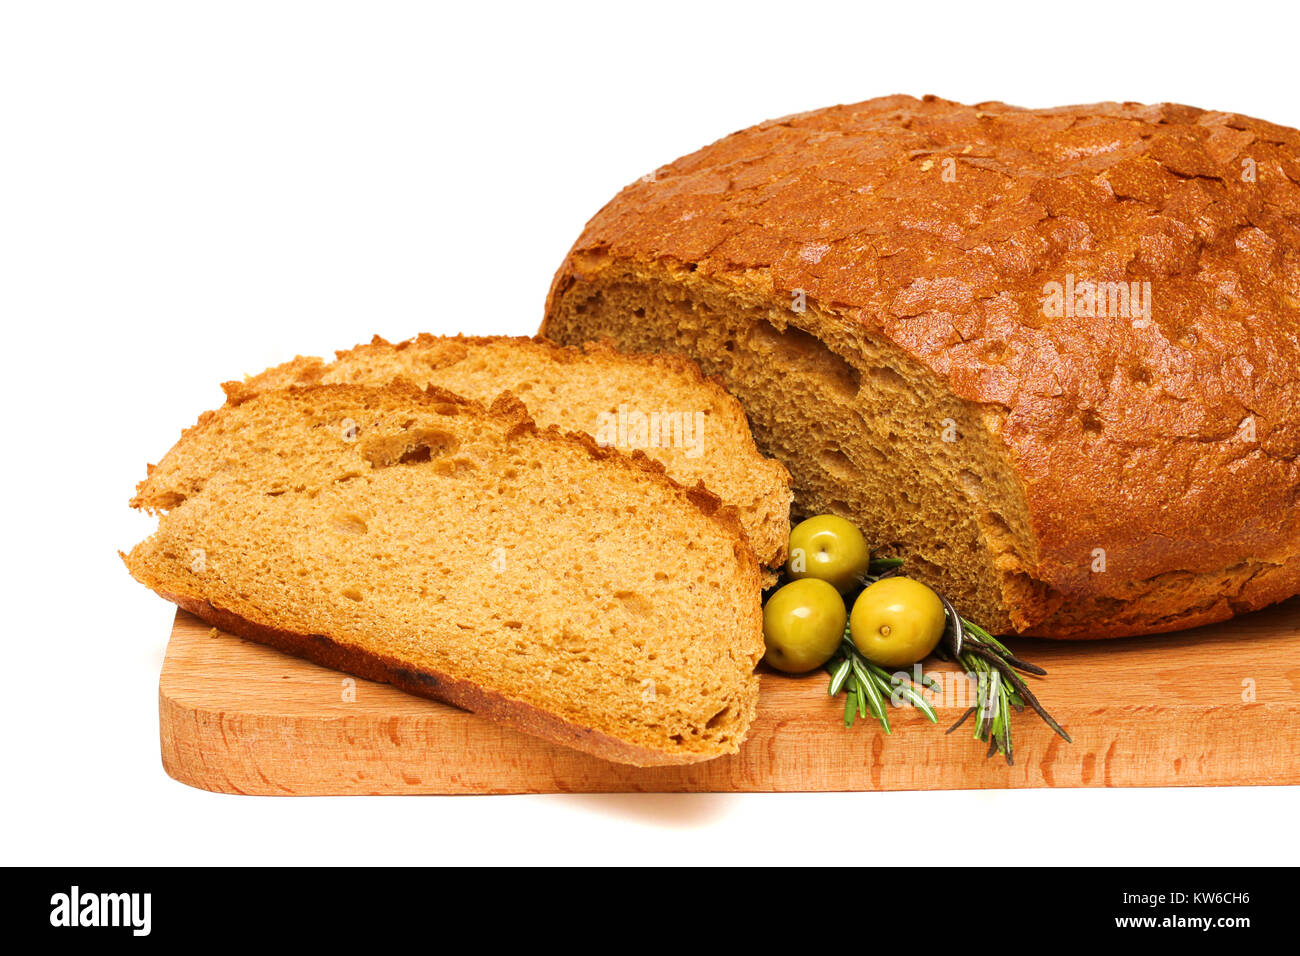 cut bread, rosemary, olives and wooden board isolated on a white backgroud Stock Photo